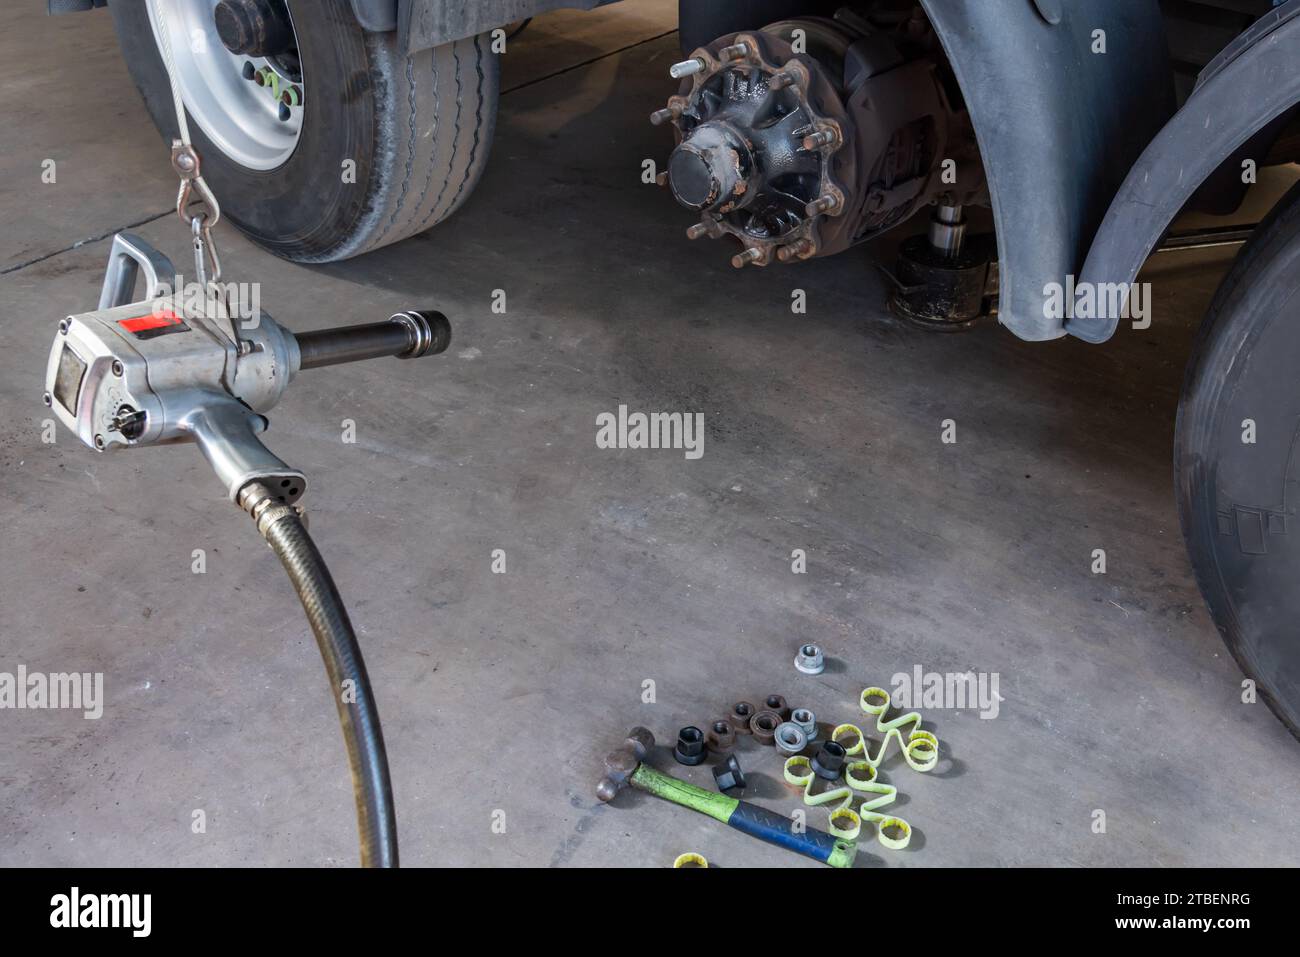 Compressed air tool to remove wheel bolts in a tire shop. Stock Photo